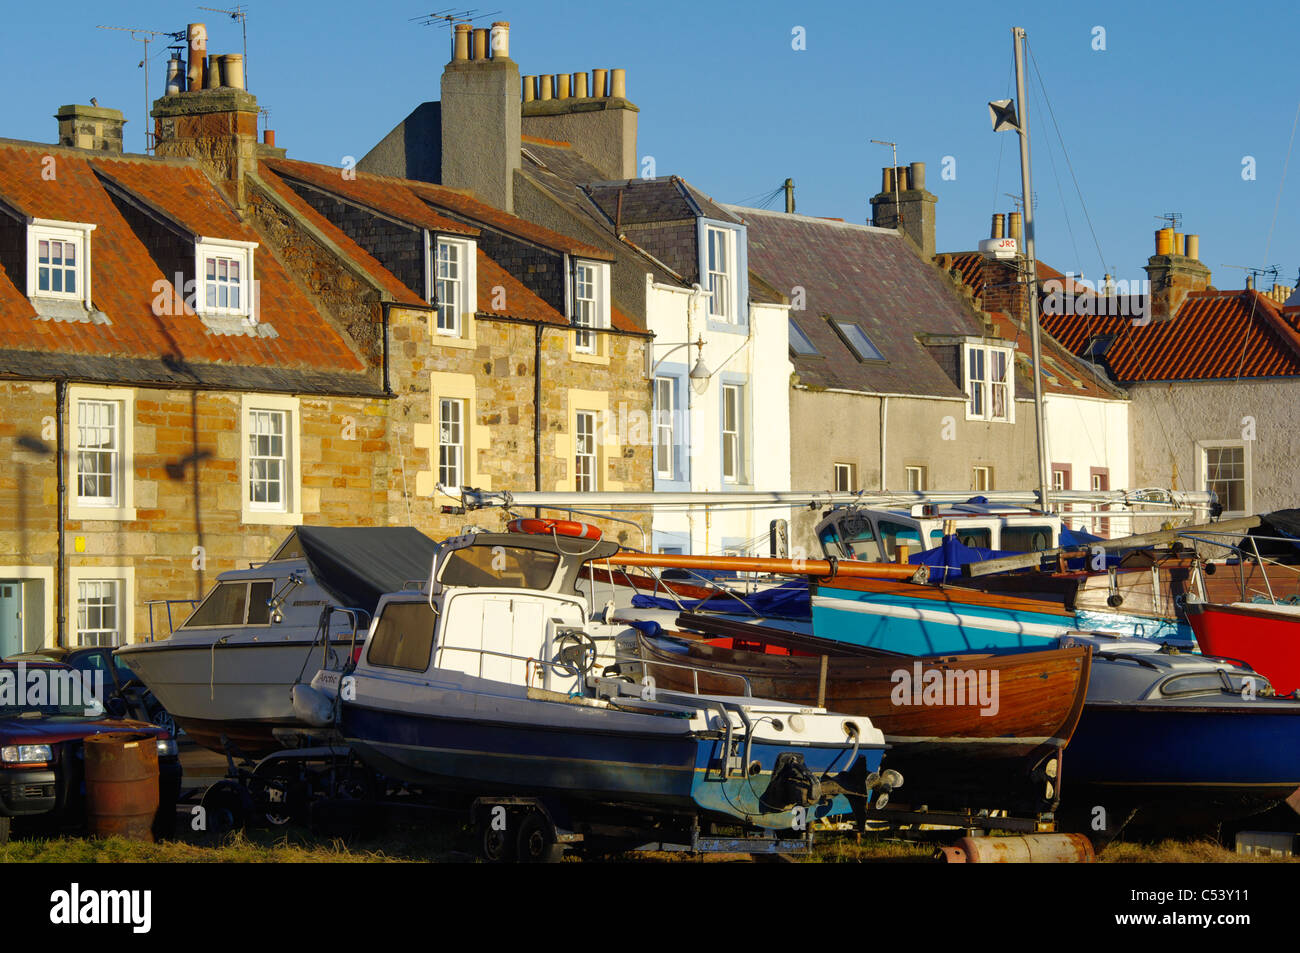 St Monans, Fife - a bright December day.  Boats laid up for the winter and village houses Stock Photo